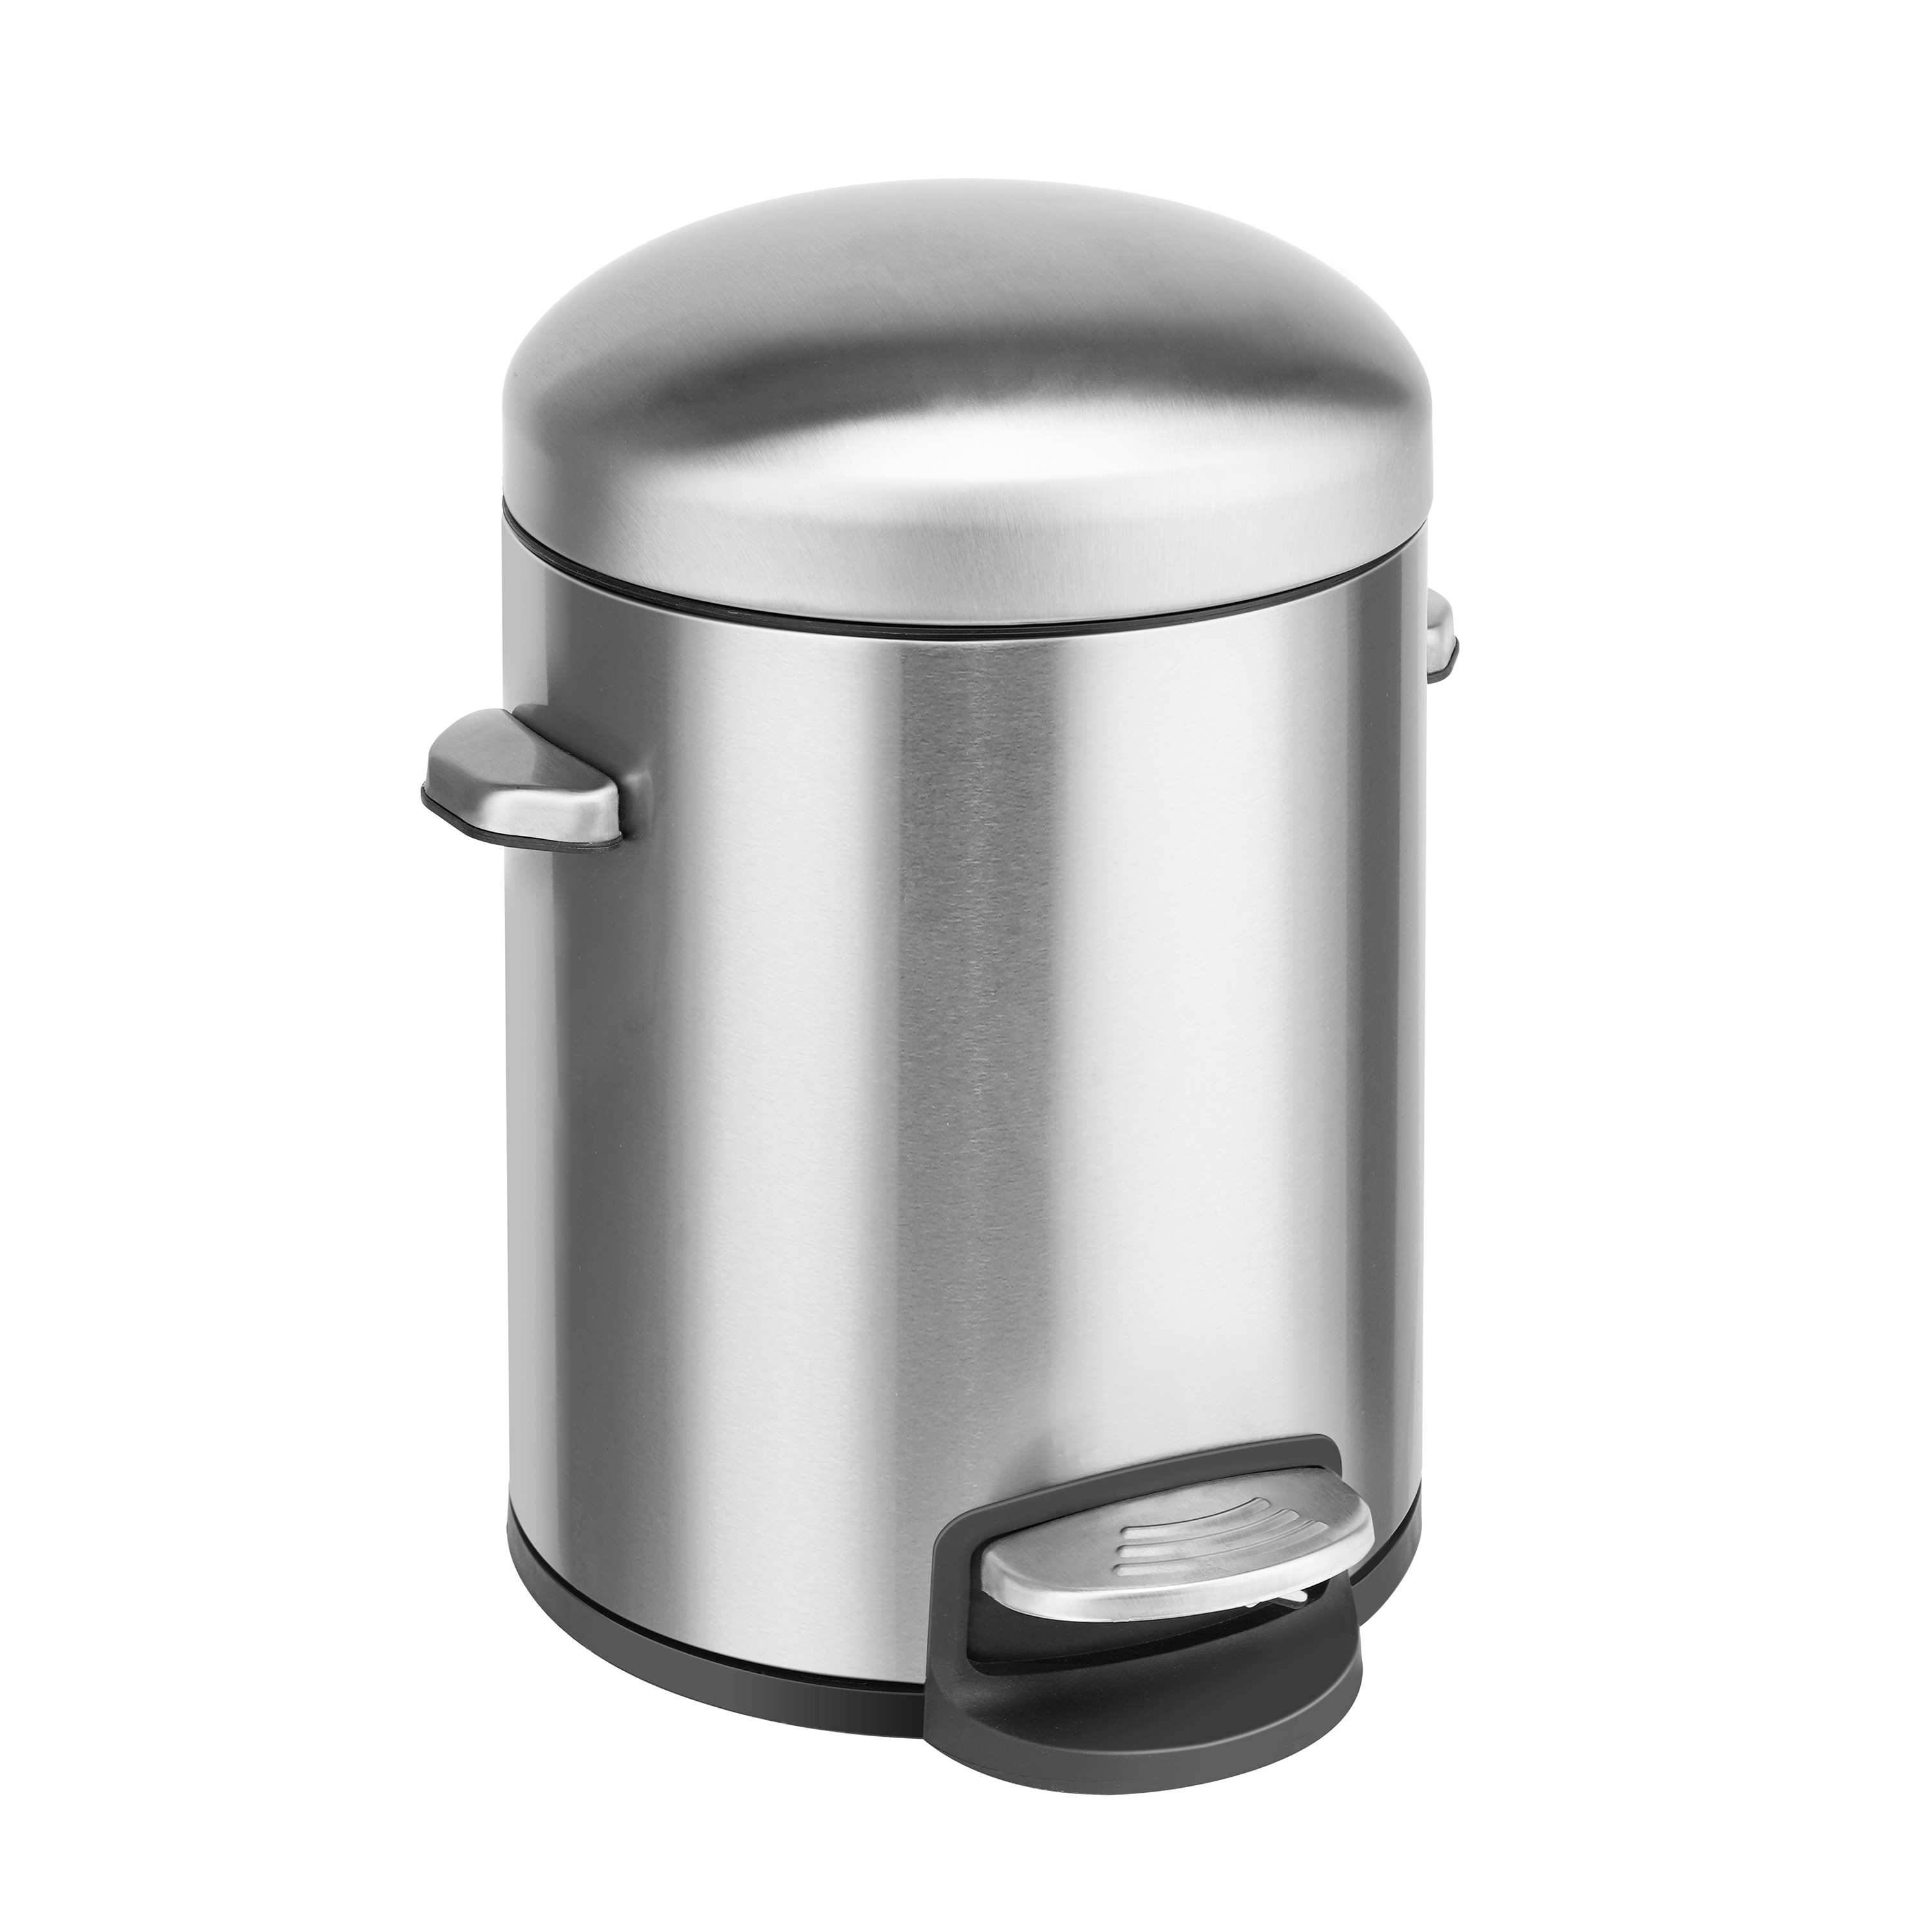 Innovaze 3.2 Gal./12 Liter Stainless Steel Rectangular Step-On Trash Can for Bathroom and Kitchen